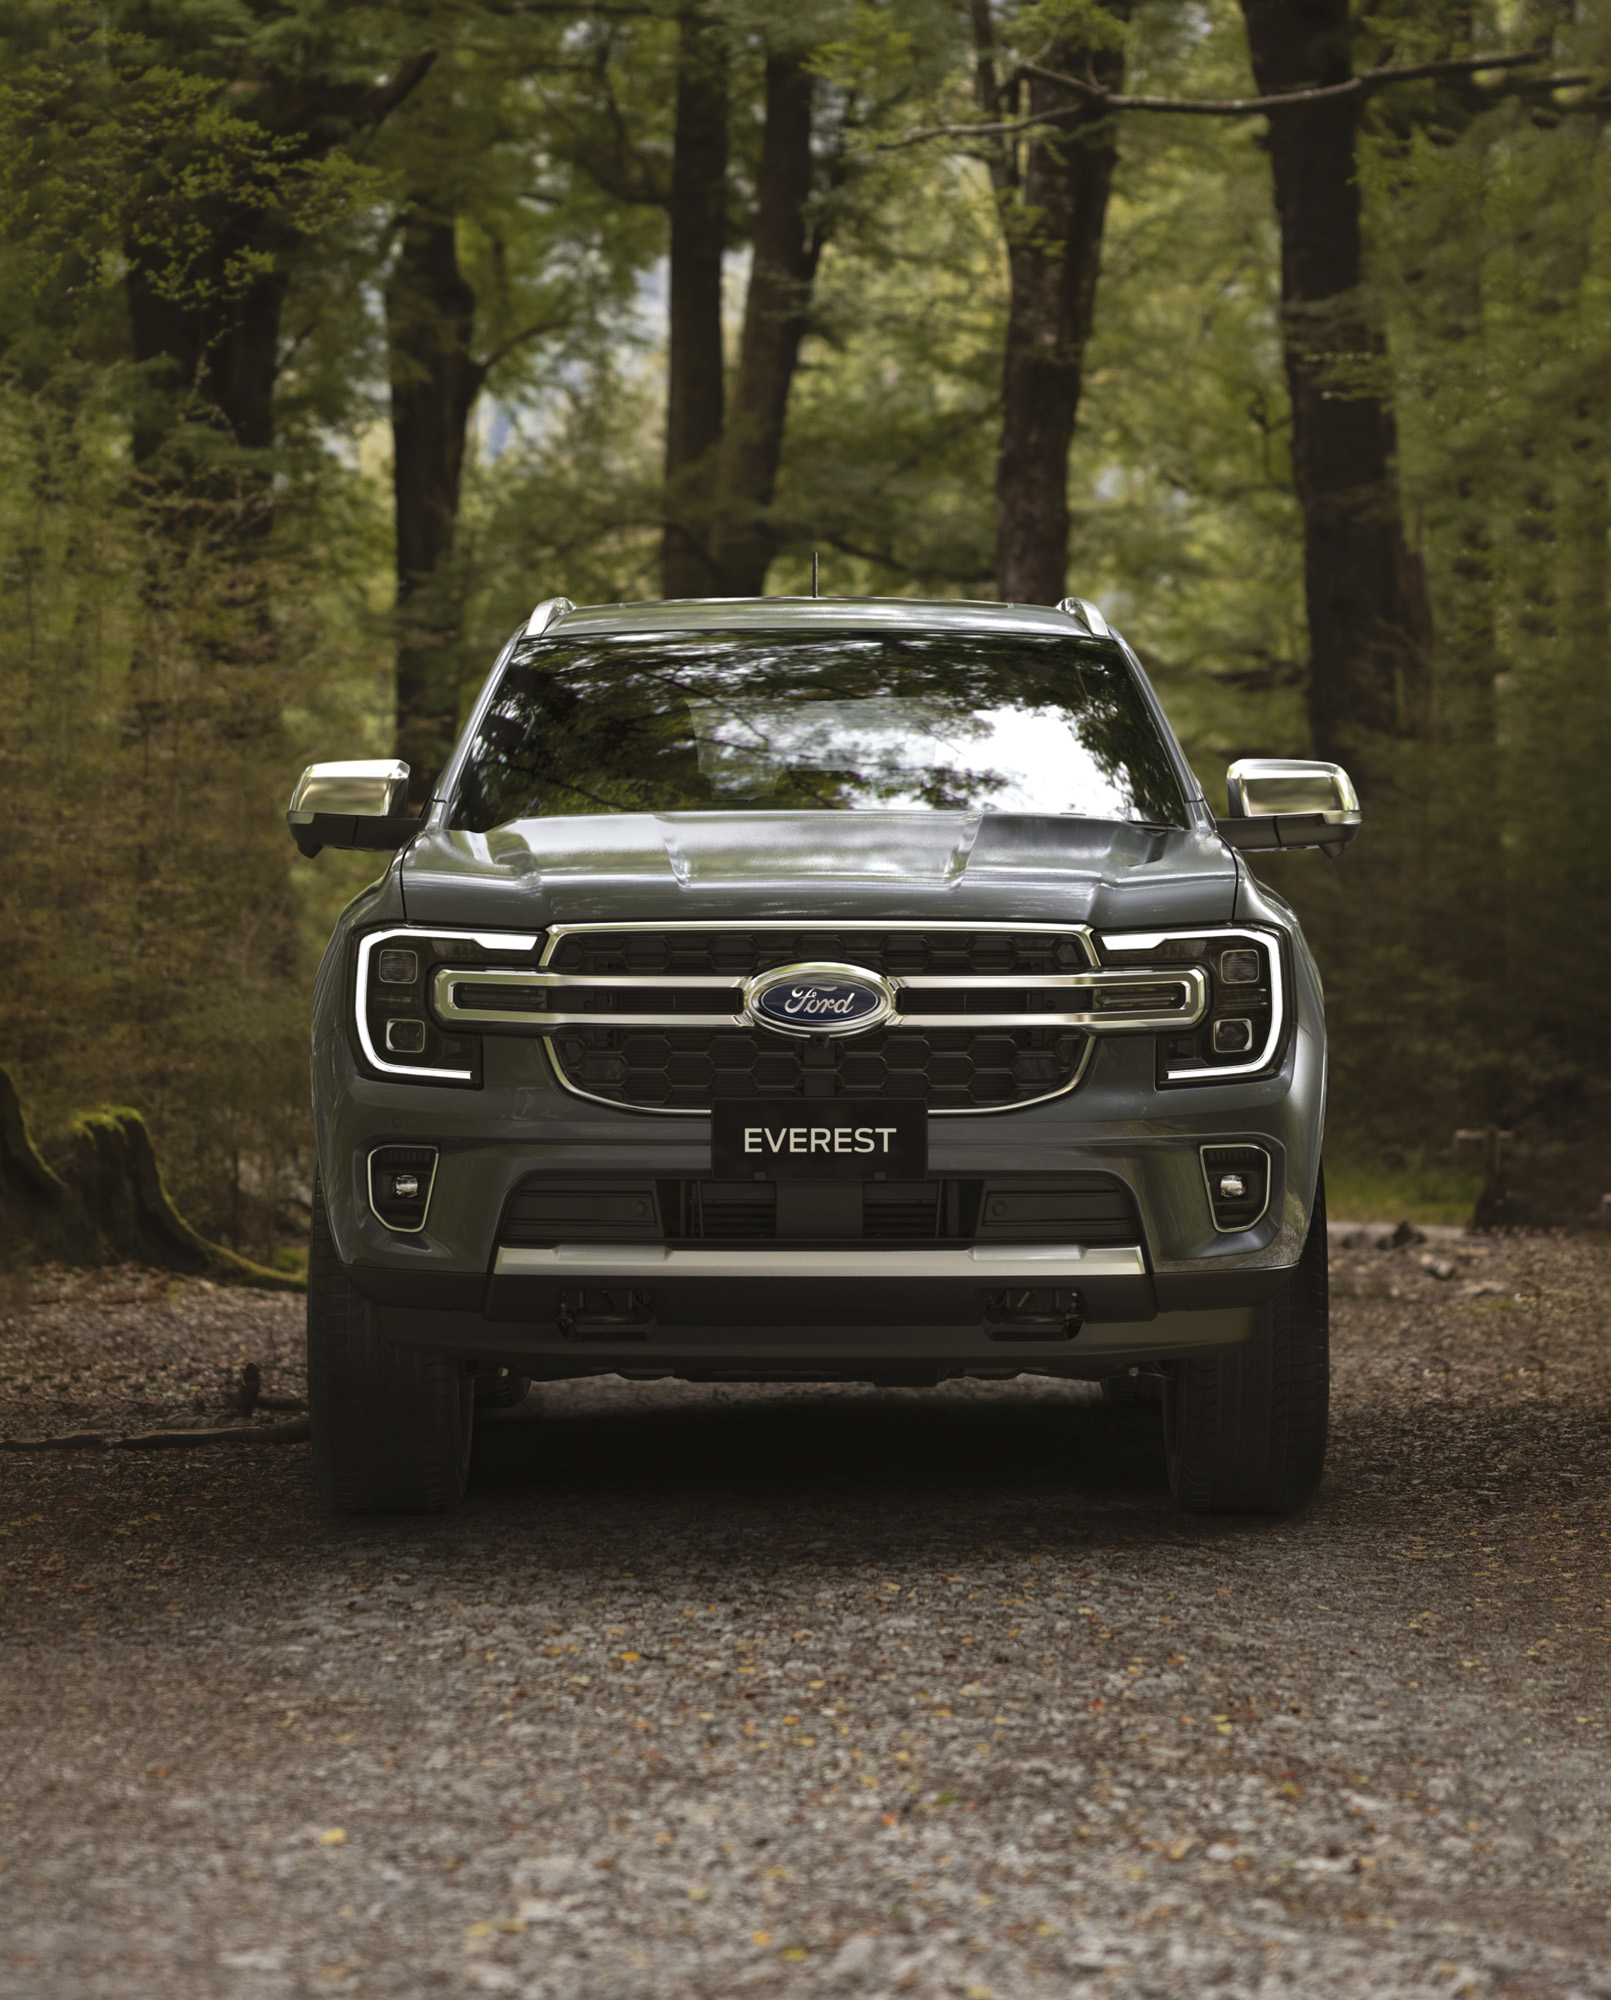 GO Ford announces arrival of Next–Gen Ford EVEREST in Nepal